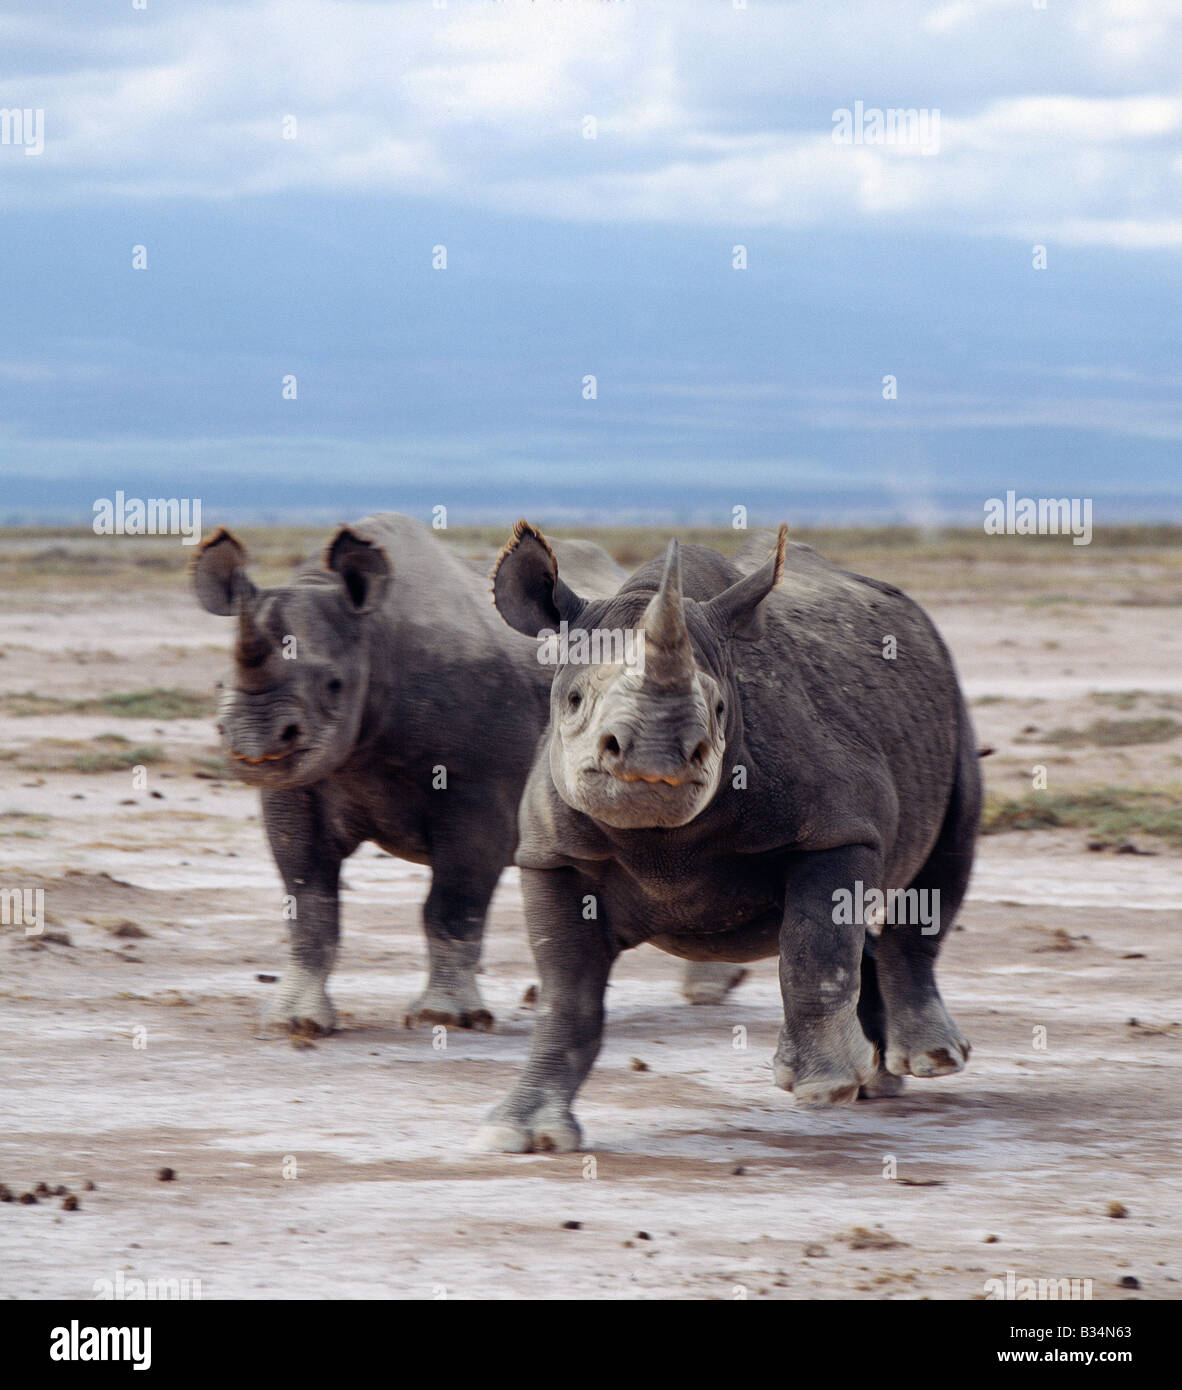 Kenya, Kajiado District, Amboseli. Two black rhinos on the open plains at Amboseli. Poaching of this severely endangered species led to its extermination in this region in the late 1980's.Rhinos have very poor eyesight and are prone to charge at the slightest noise or disturbance. . Stock Photo